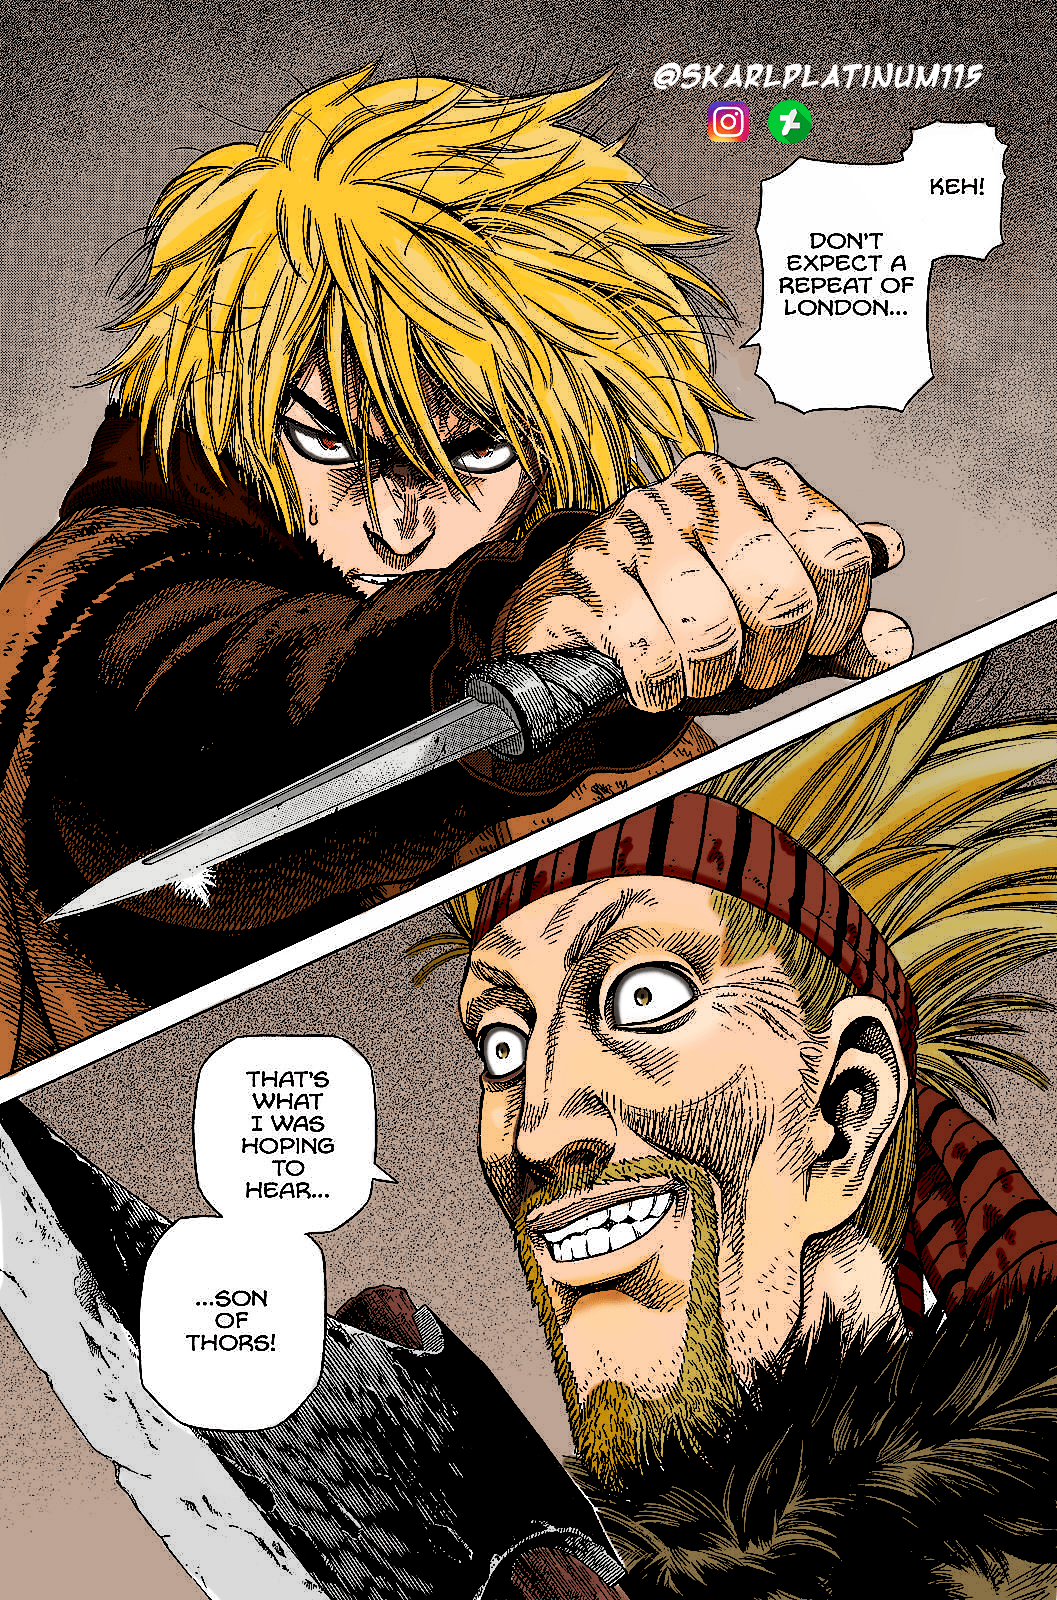 Vinland Saga iPhone Android backgrounds Vinland Saga Season 2 iPhone  cool backgrounds HD phone wallpaper  Peakpx